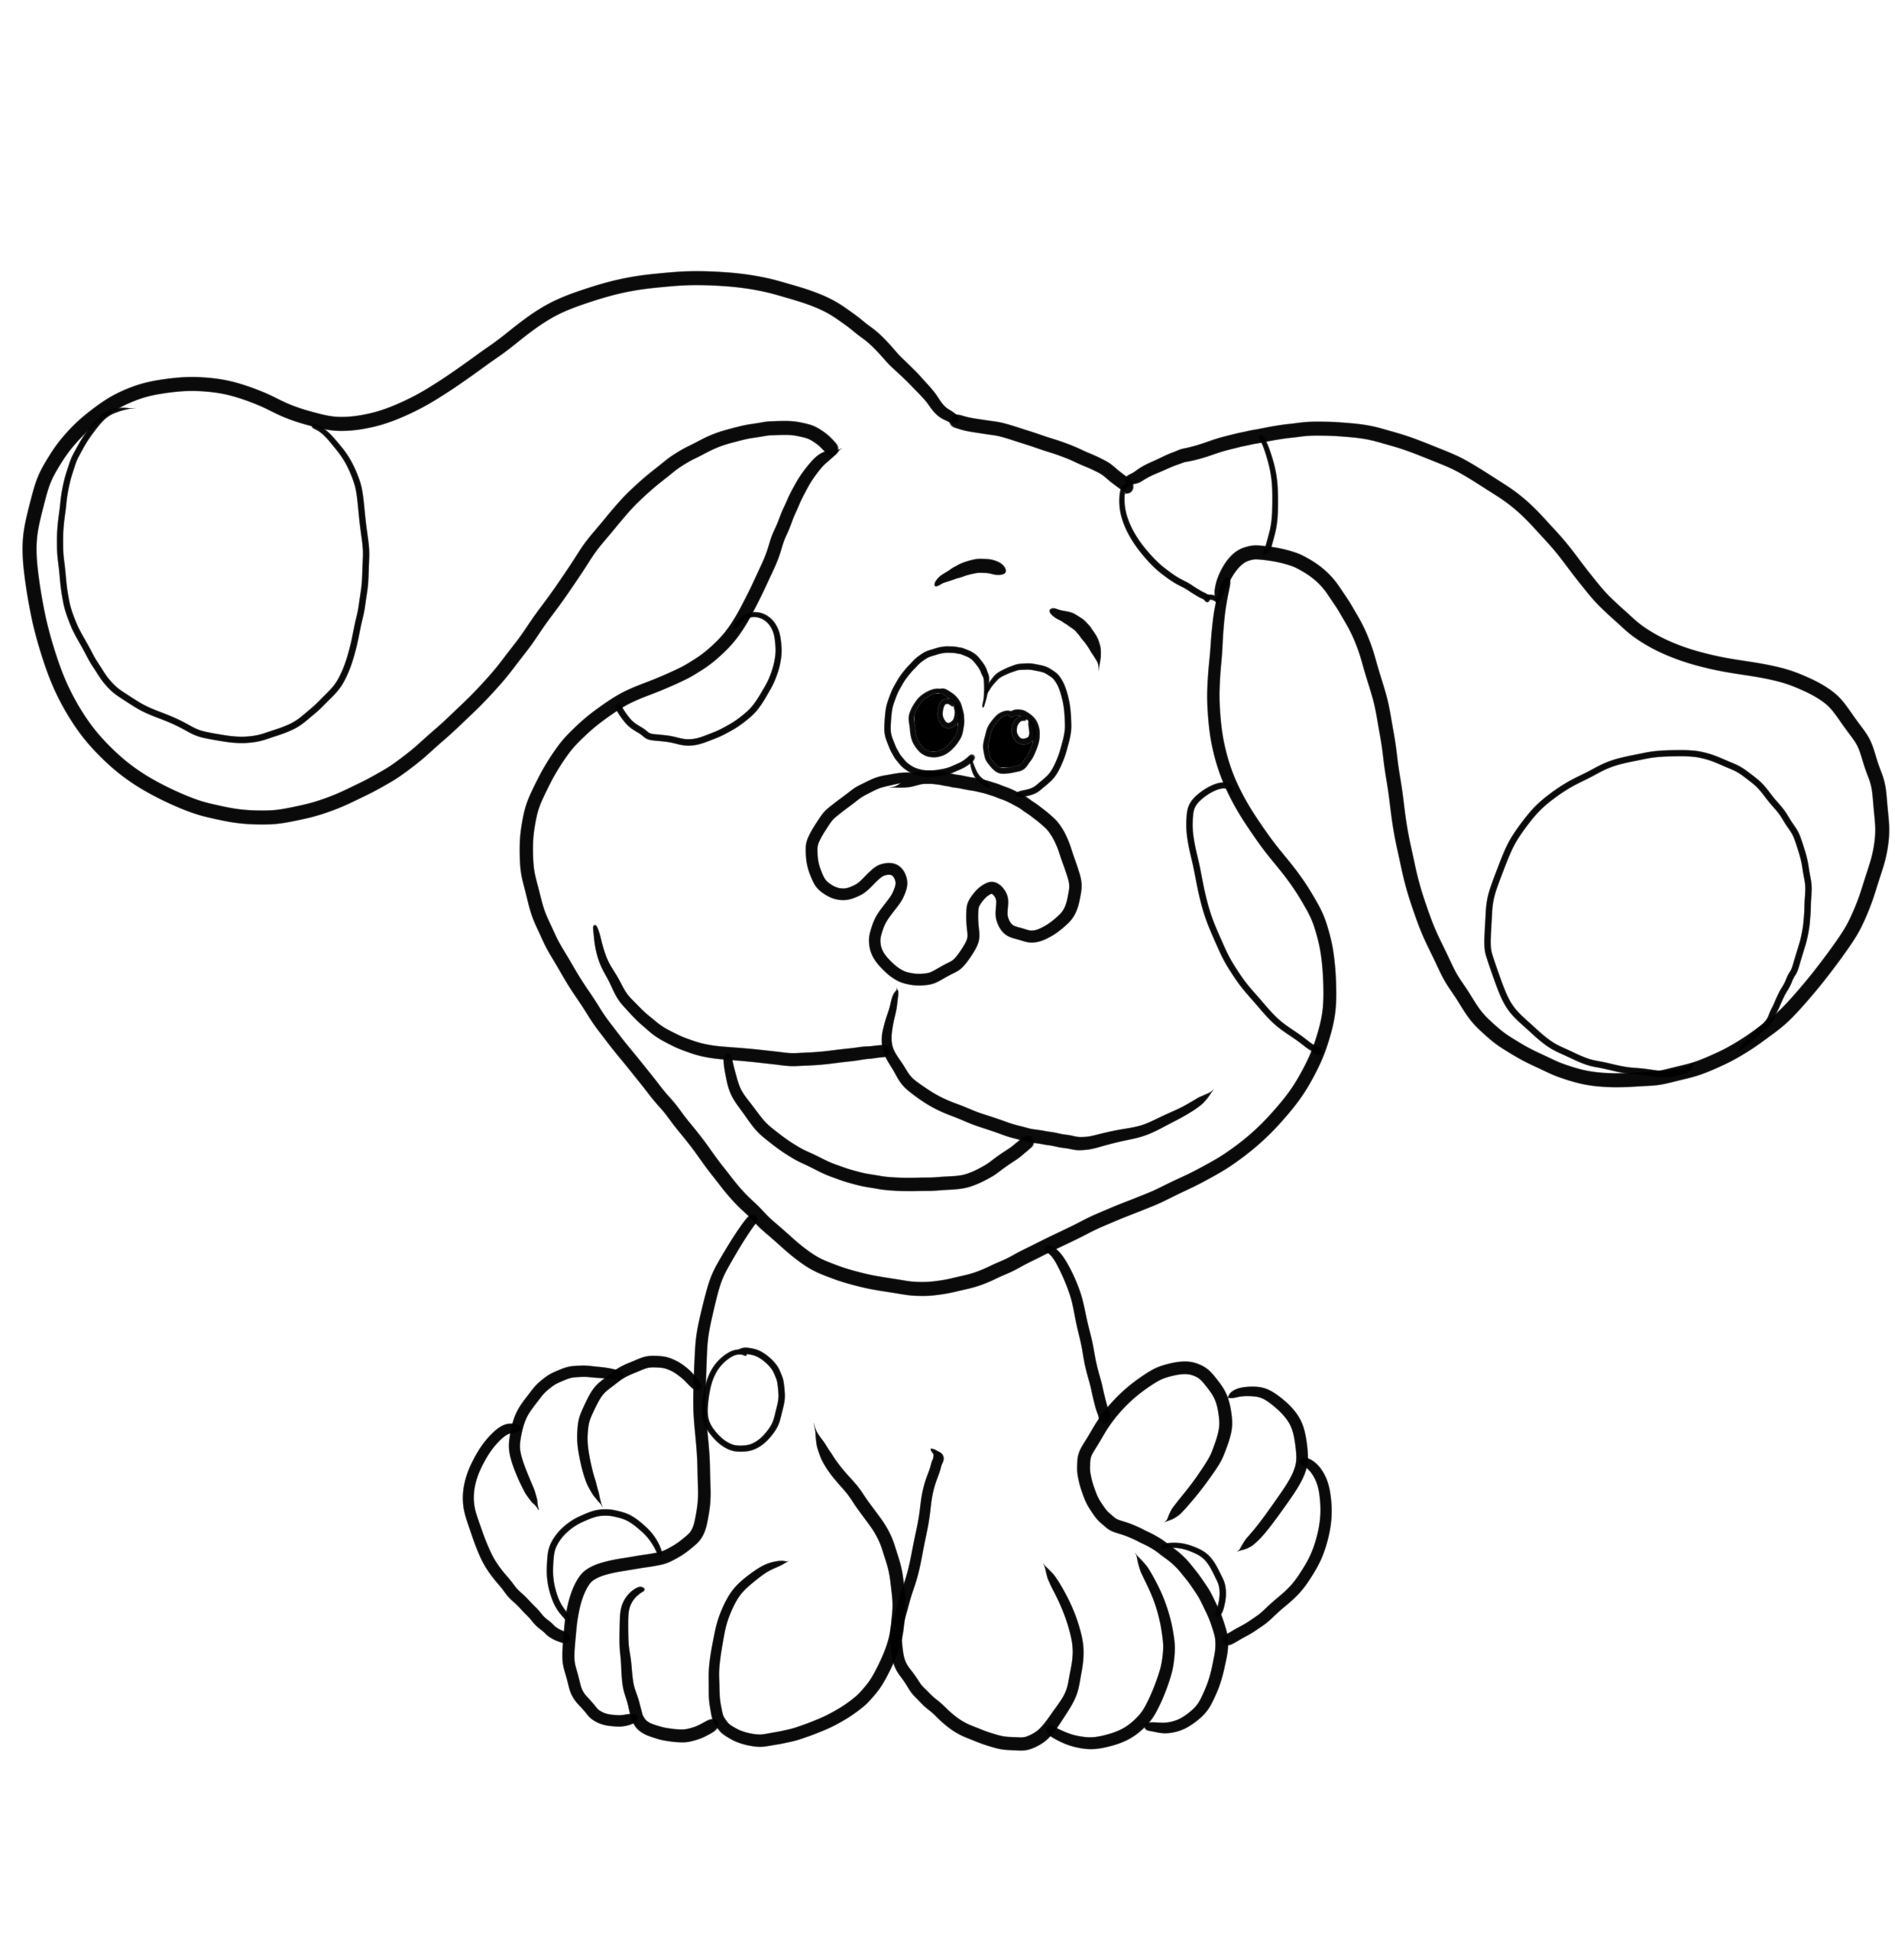 Blue's Clues 04 from Blue's Clues coloring page to print and coloring